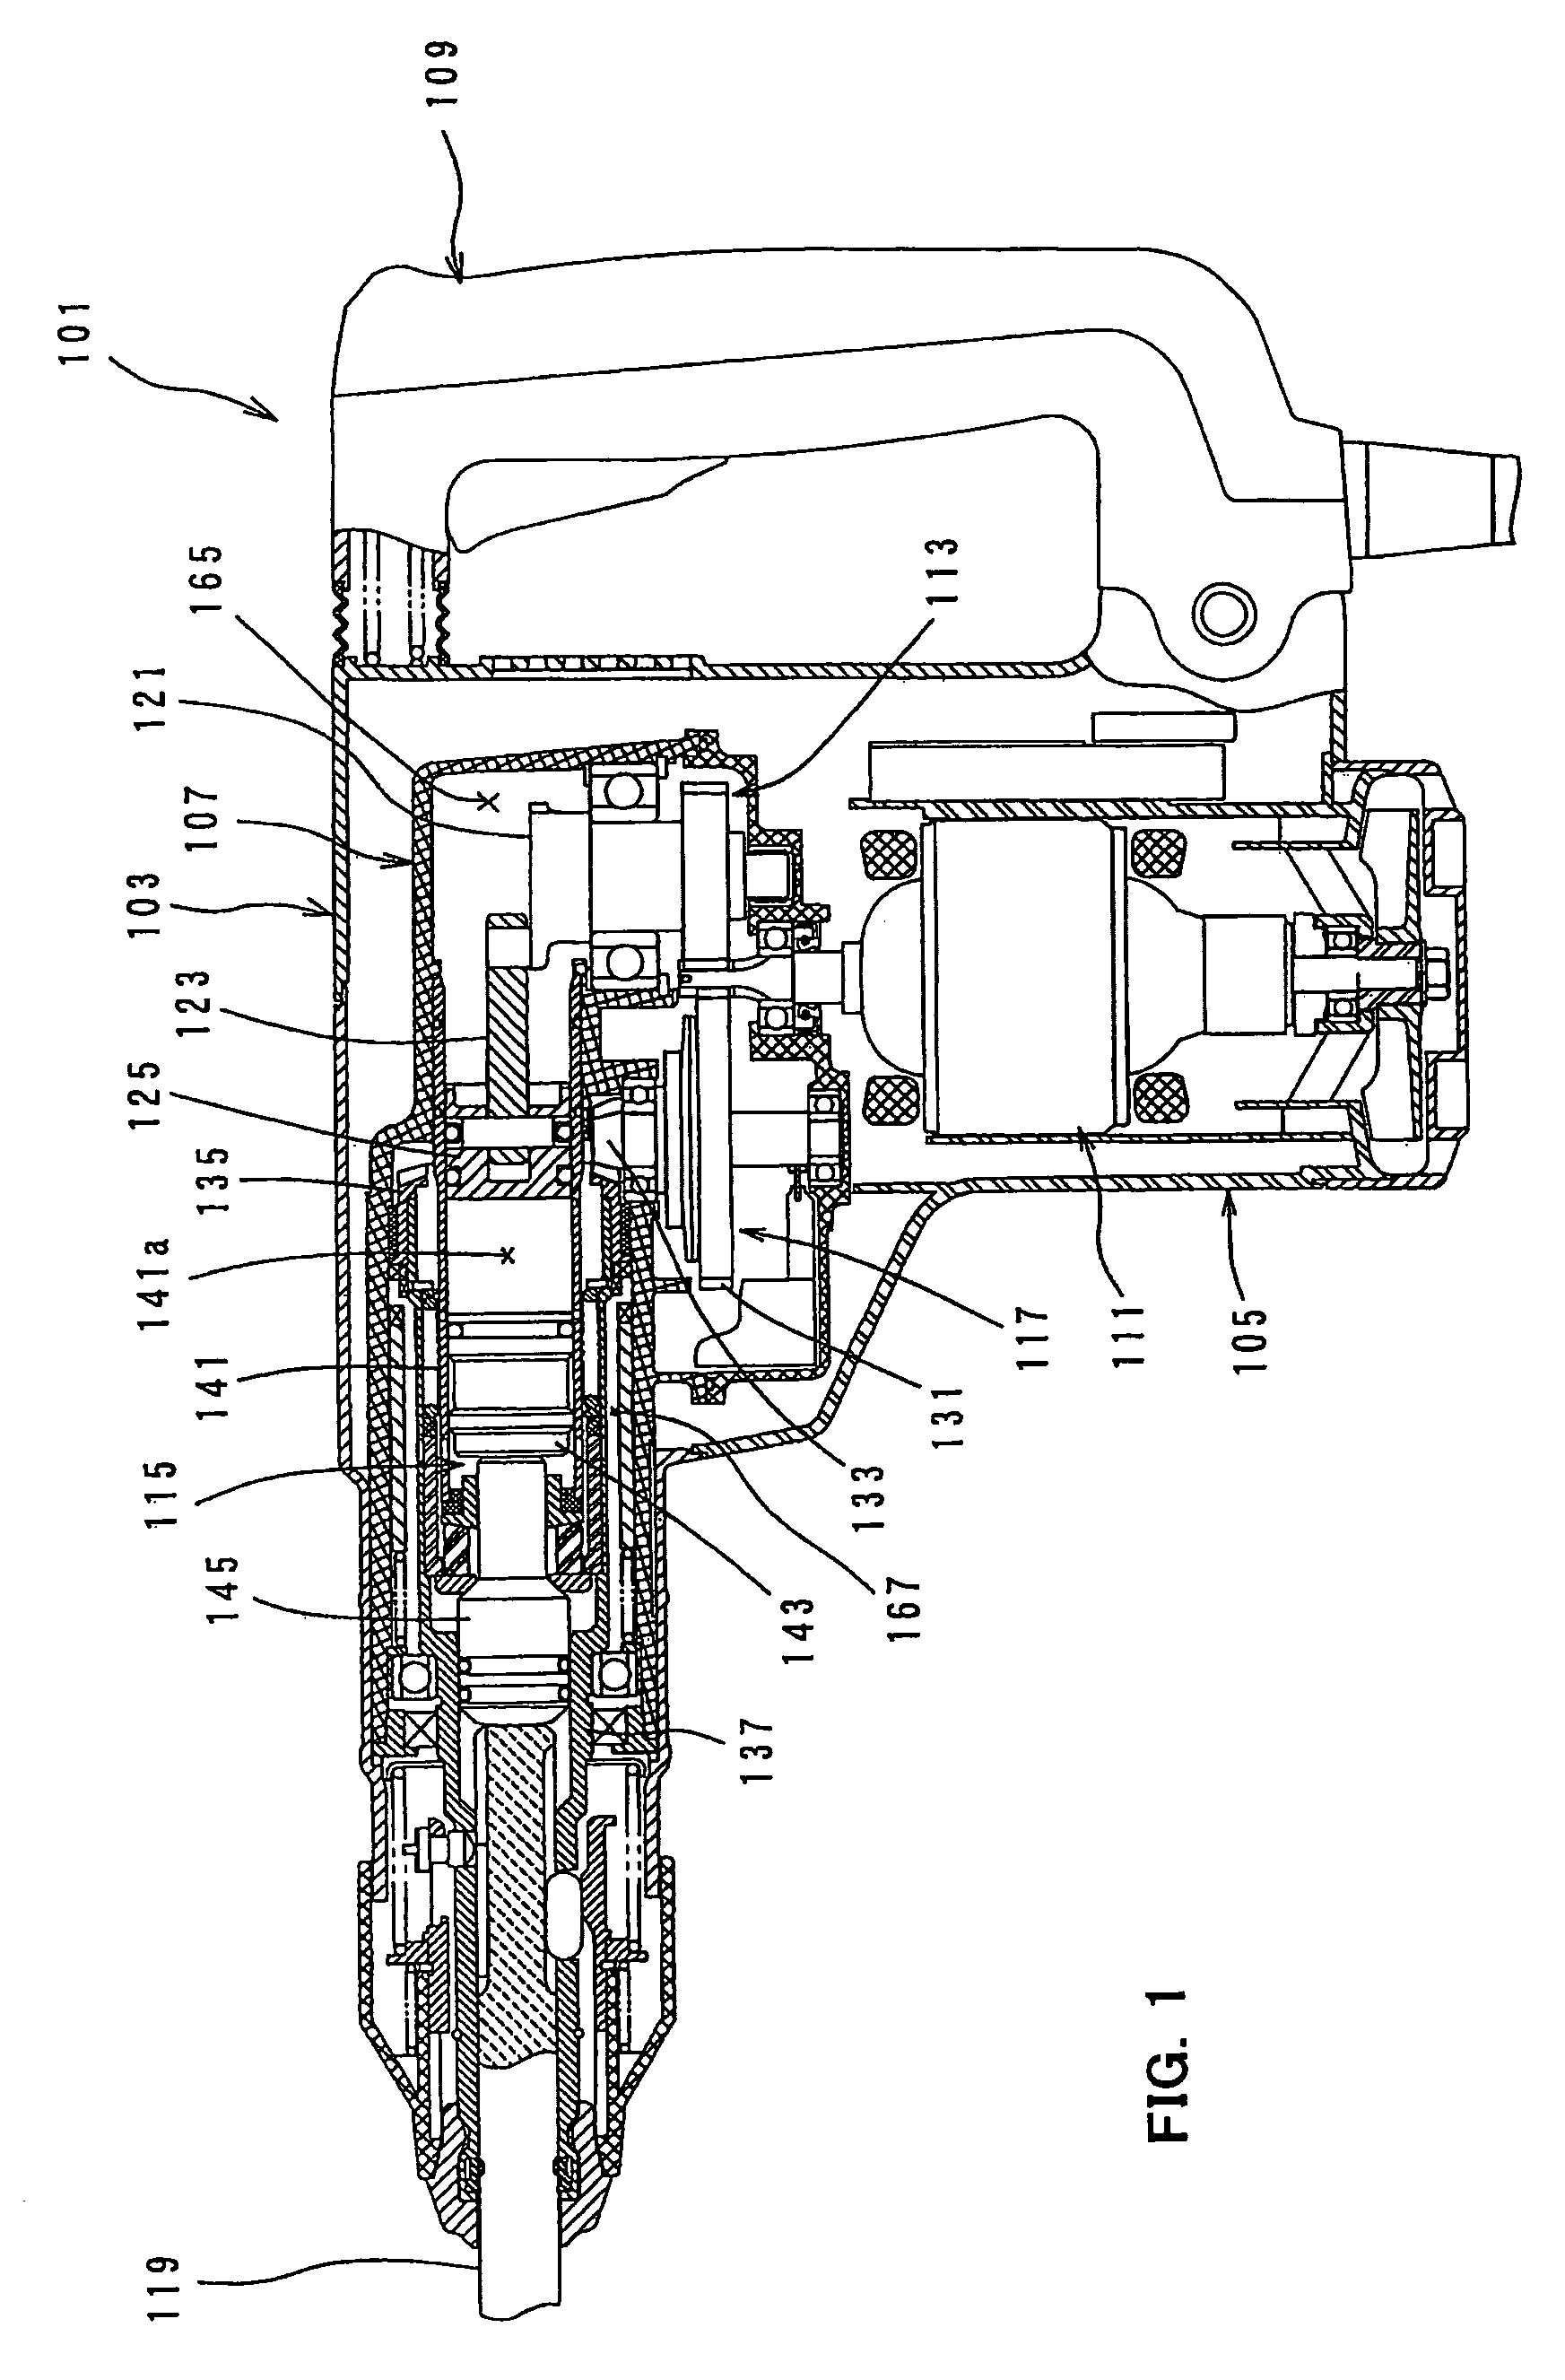 Power tool with dynamic vibration damping